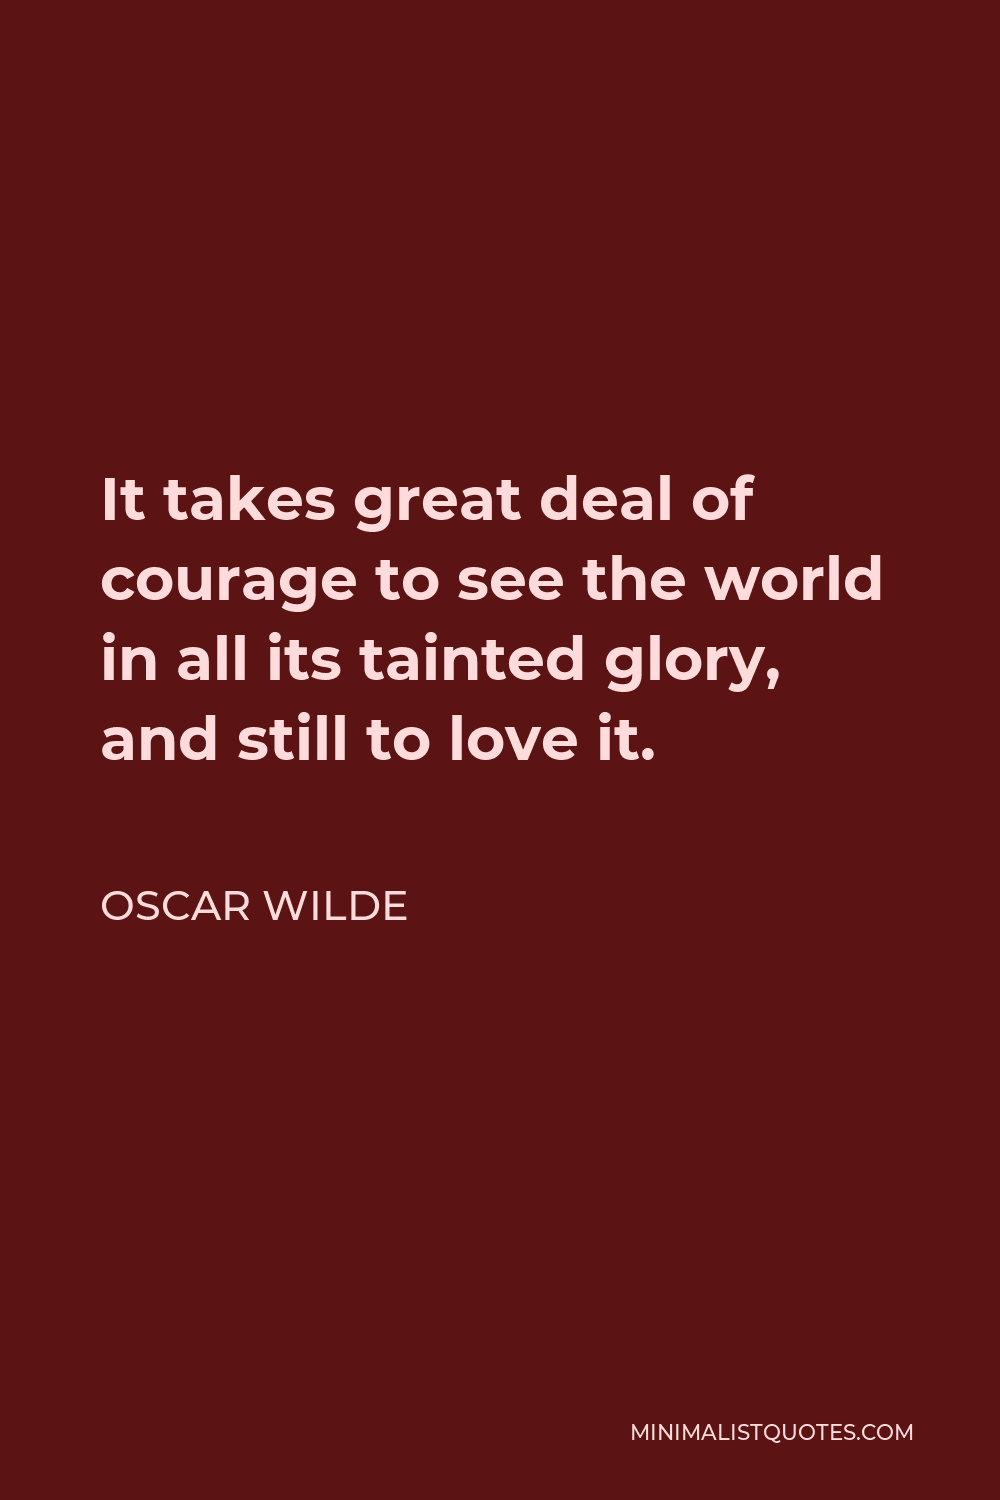 Oscar Wilde Quote - It takes great deal of courage to see the world in all its tainted glory, and still to love it.